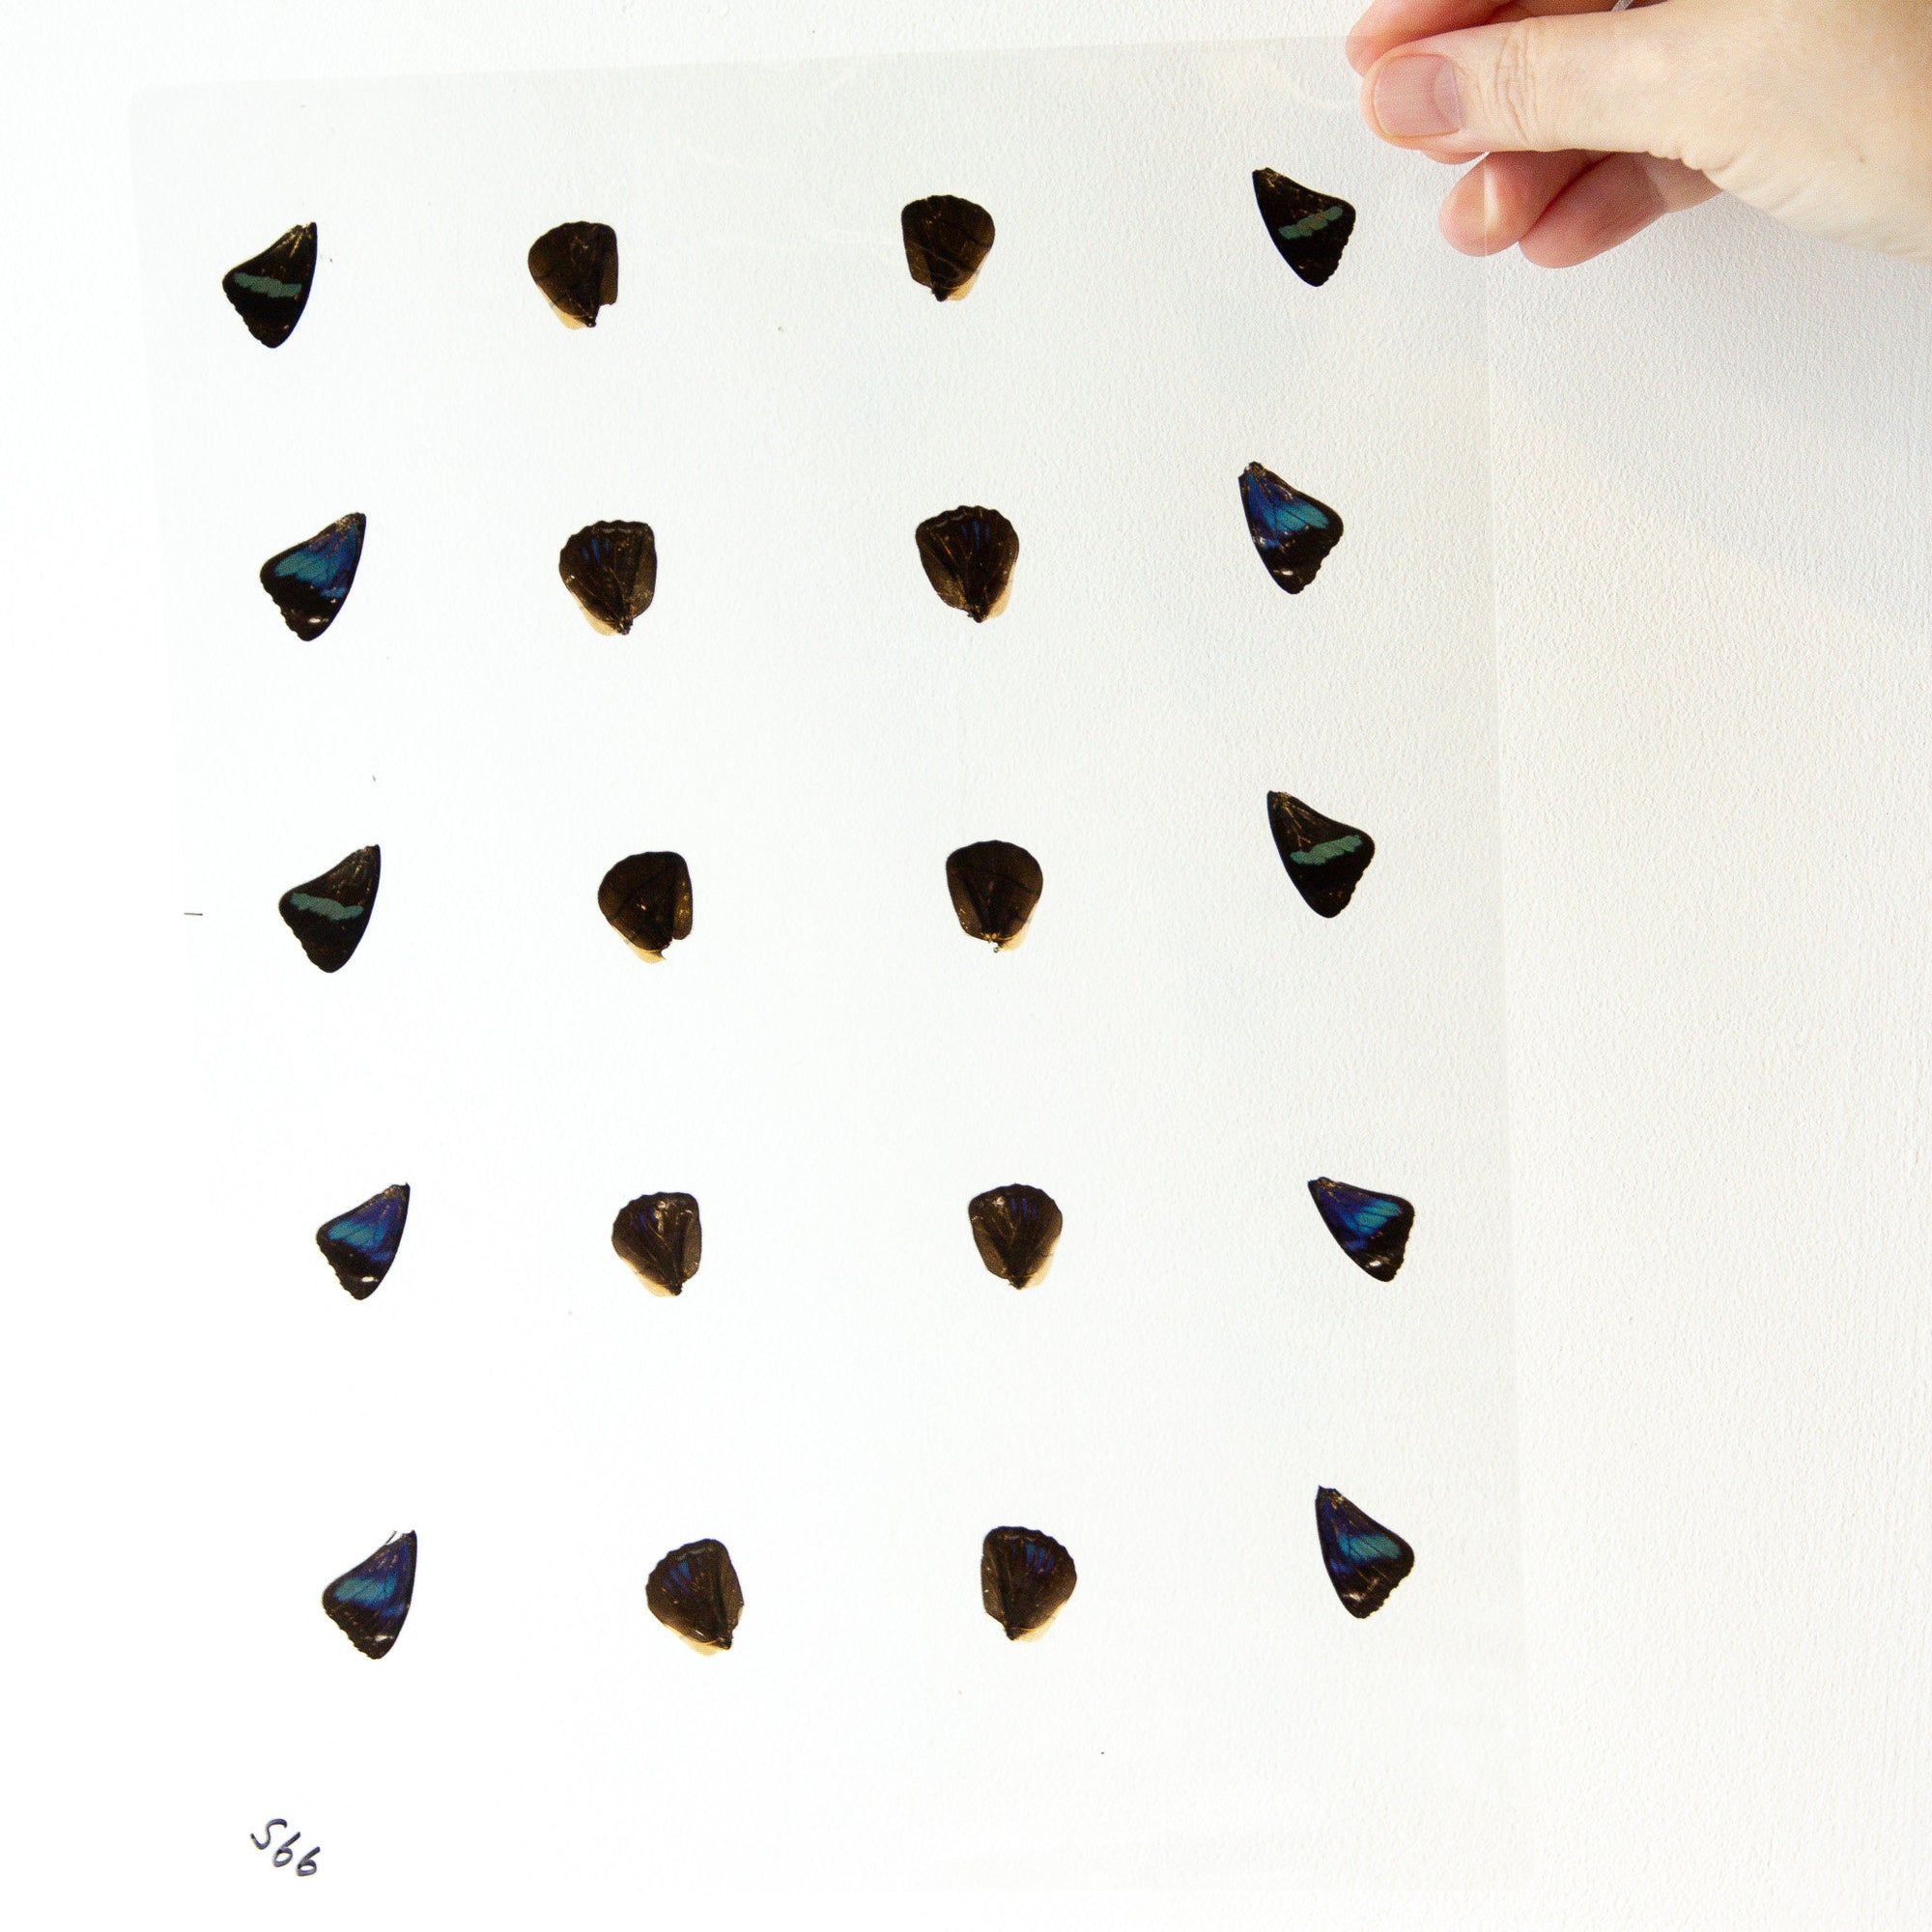 Butterfly Wings GLOSSY LAMINATED SHEET Real Ethically Sourced Specimens Moths Butterflies Wings for Art -- S66